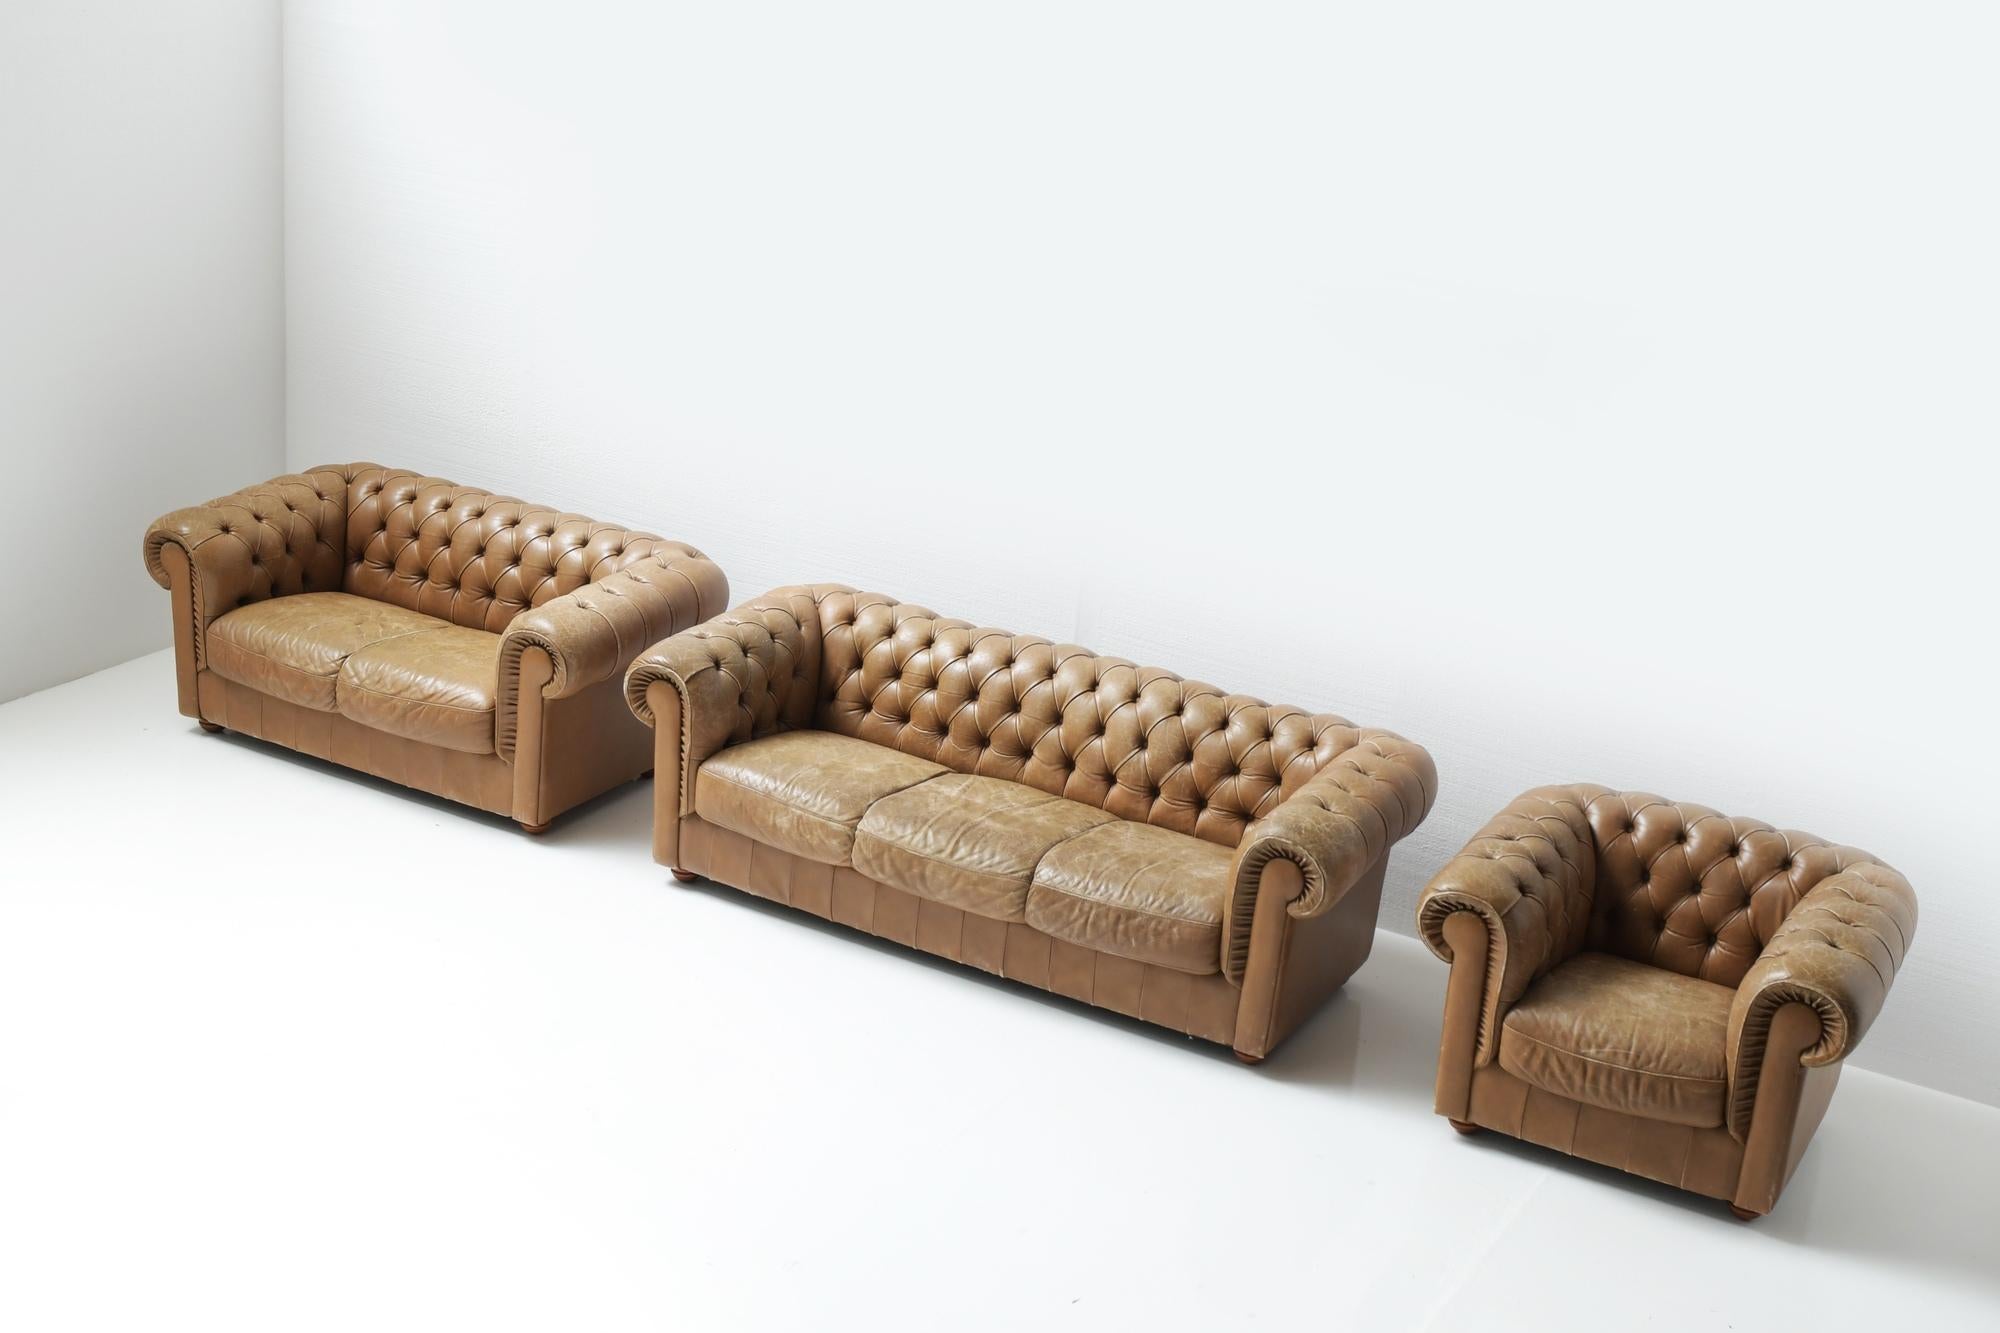 Vintage Leather Chesterfield Set 1991 by Natuzzi, Italy 4